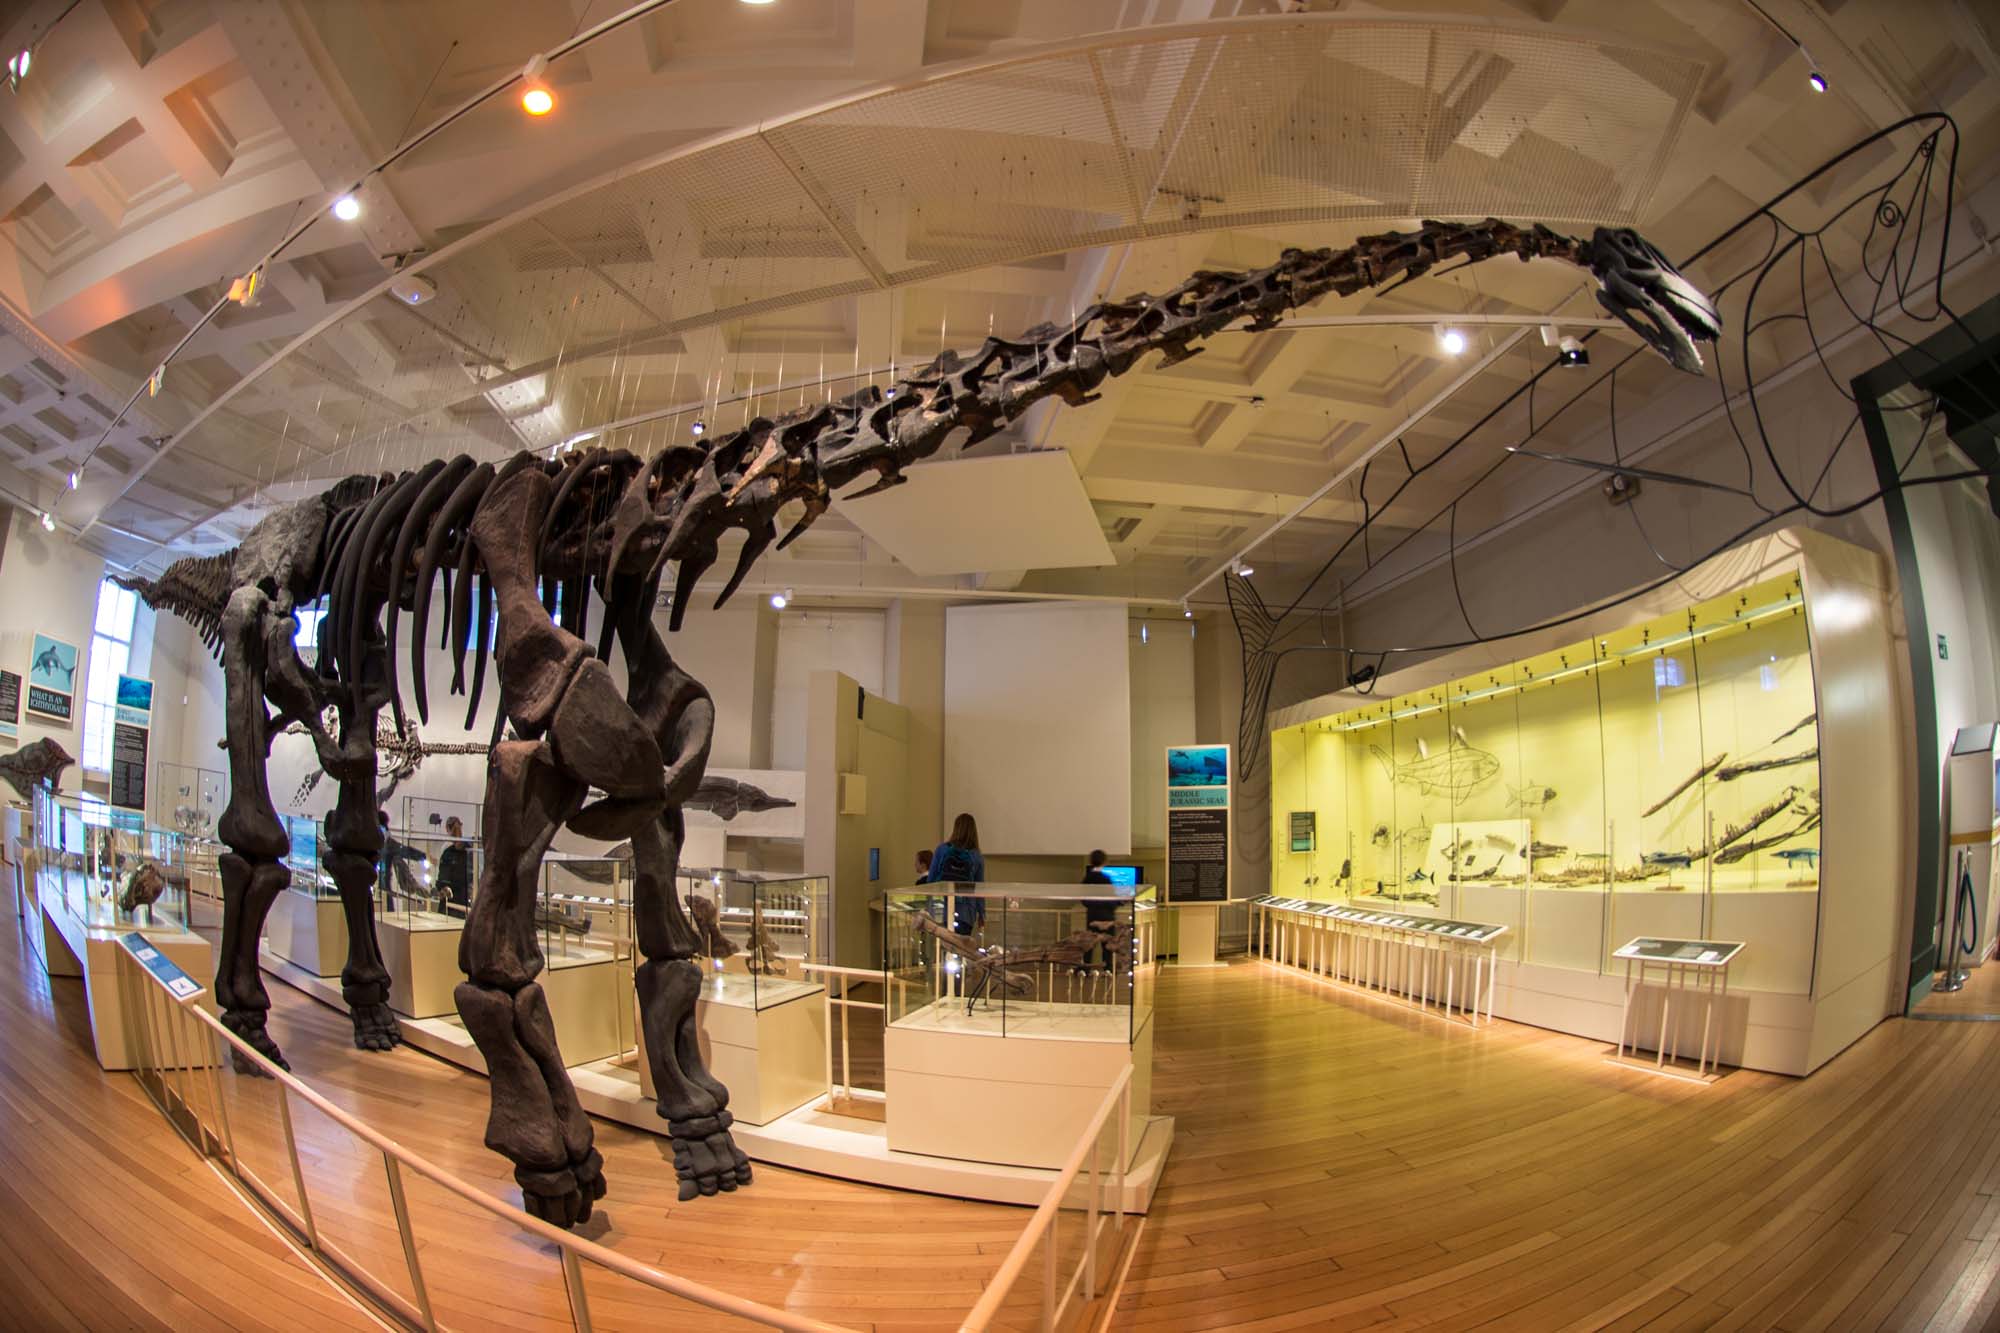 The Dinosaur Gallery as it looks today -